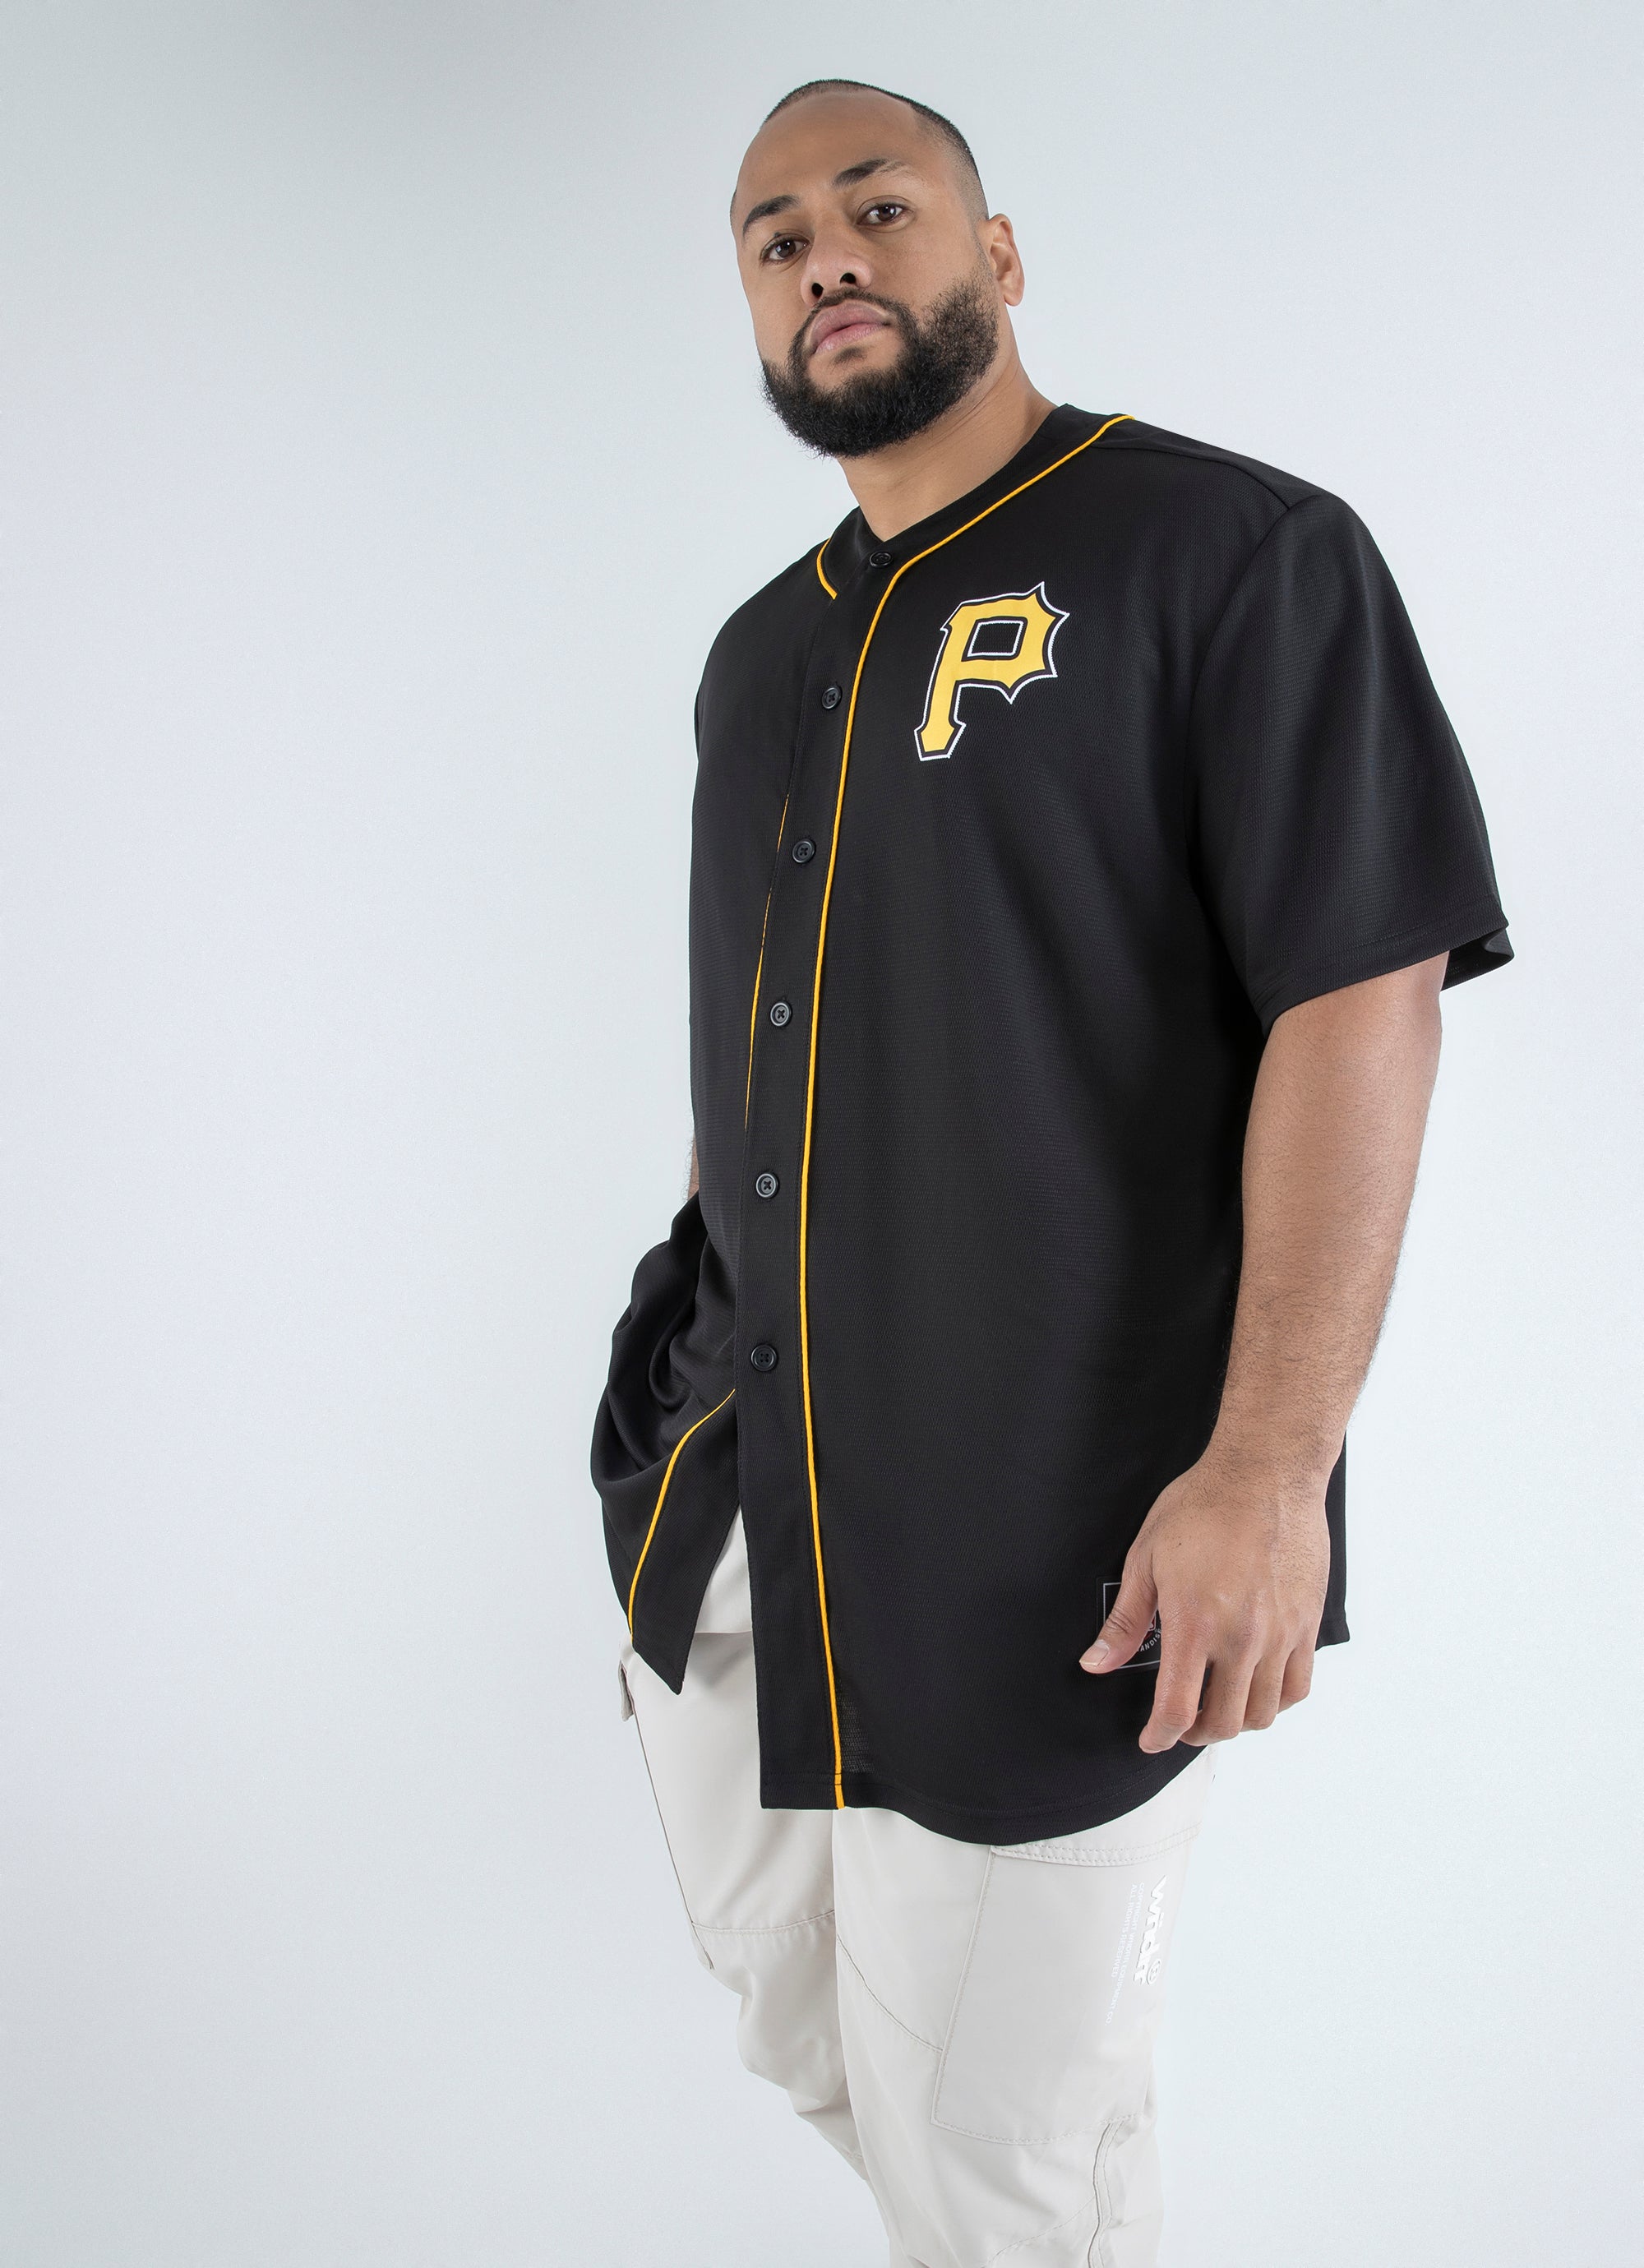 big and tall pirates jersey